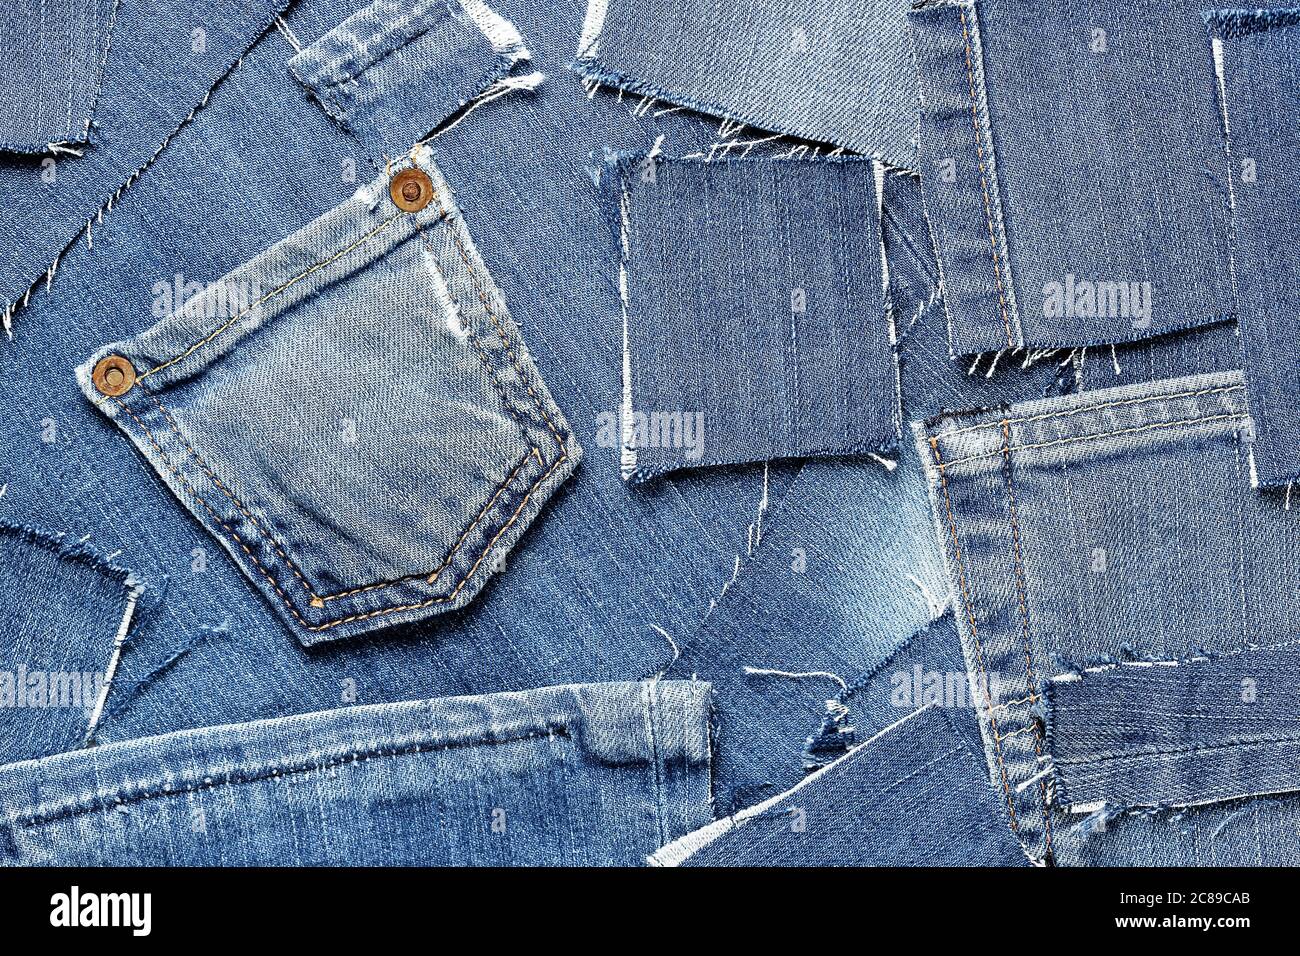 Jeans Denim Texture Patchwork Bag. Stock Photo, Picture and Royalty Free  Image. Image 72567647.